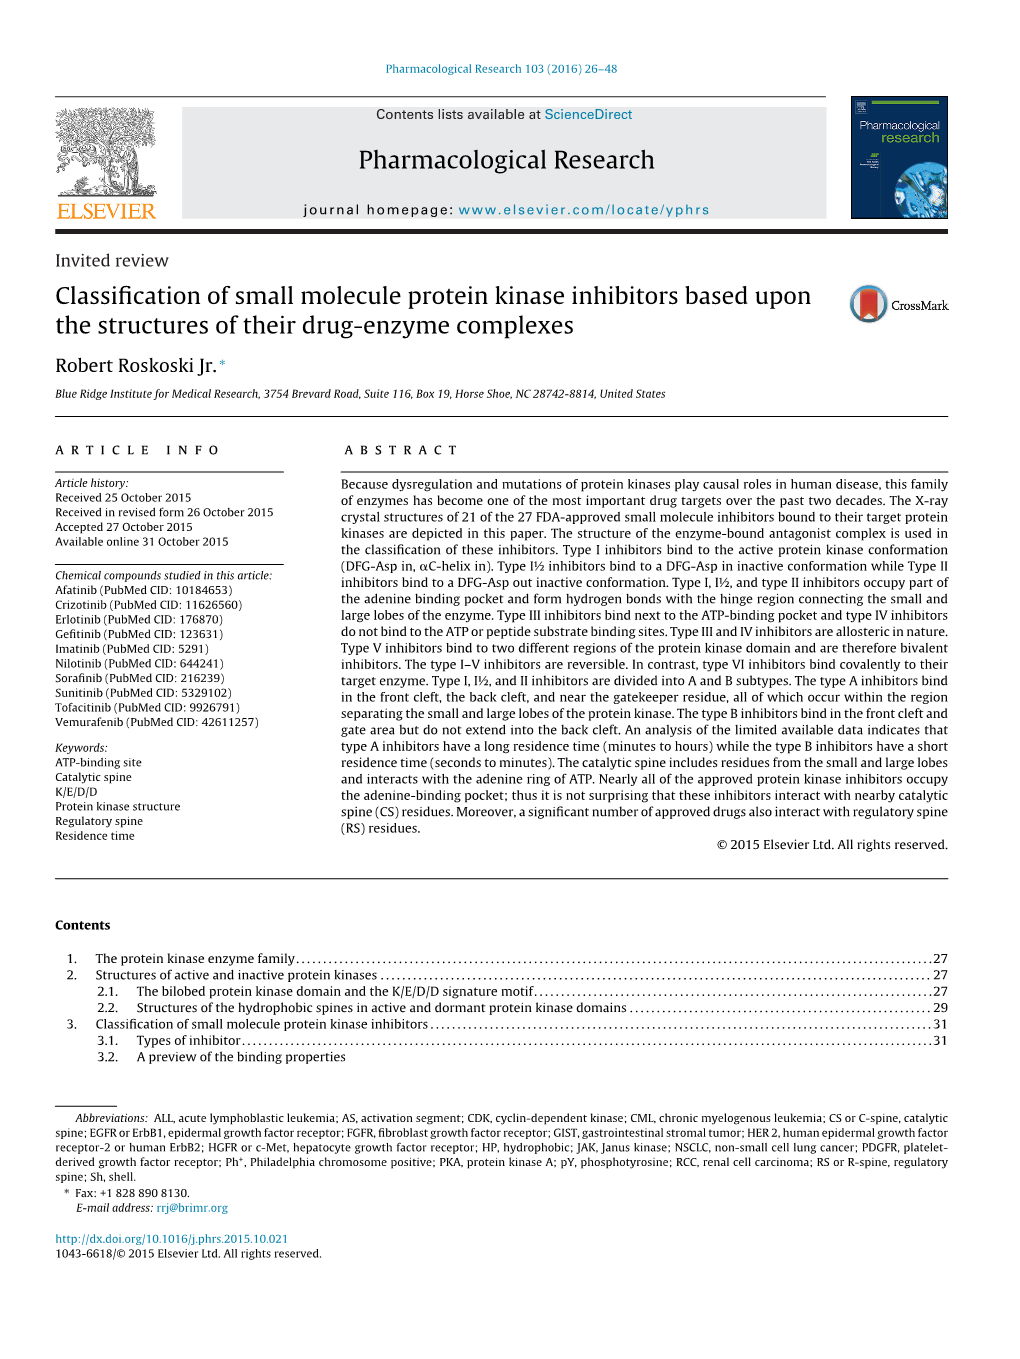 Classification of Small Molecule Protein Kinase Inhibitors Based